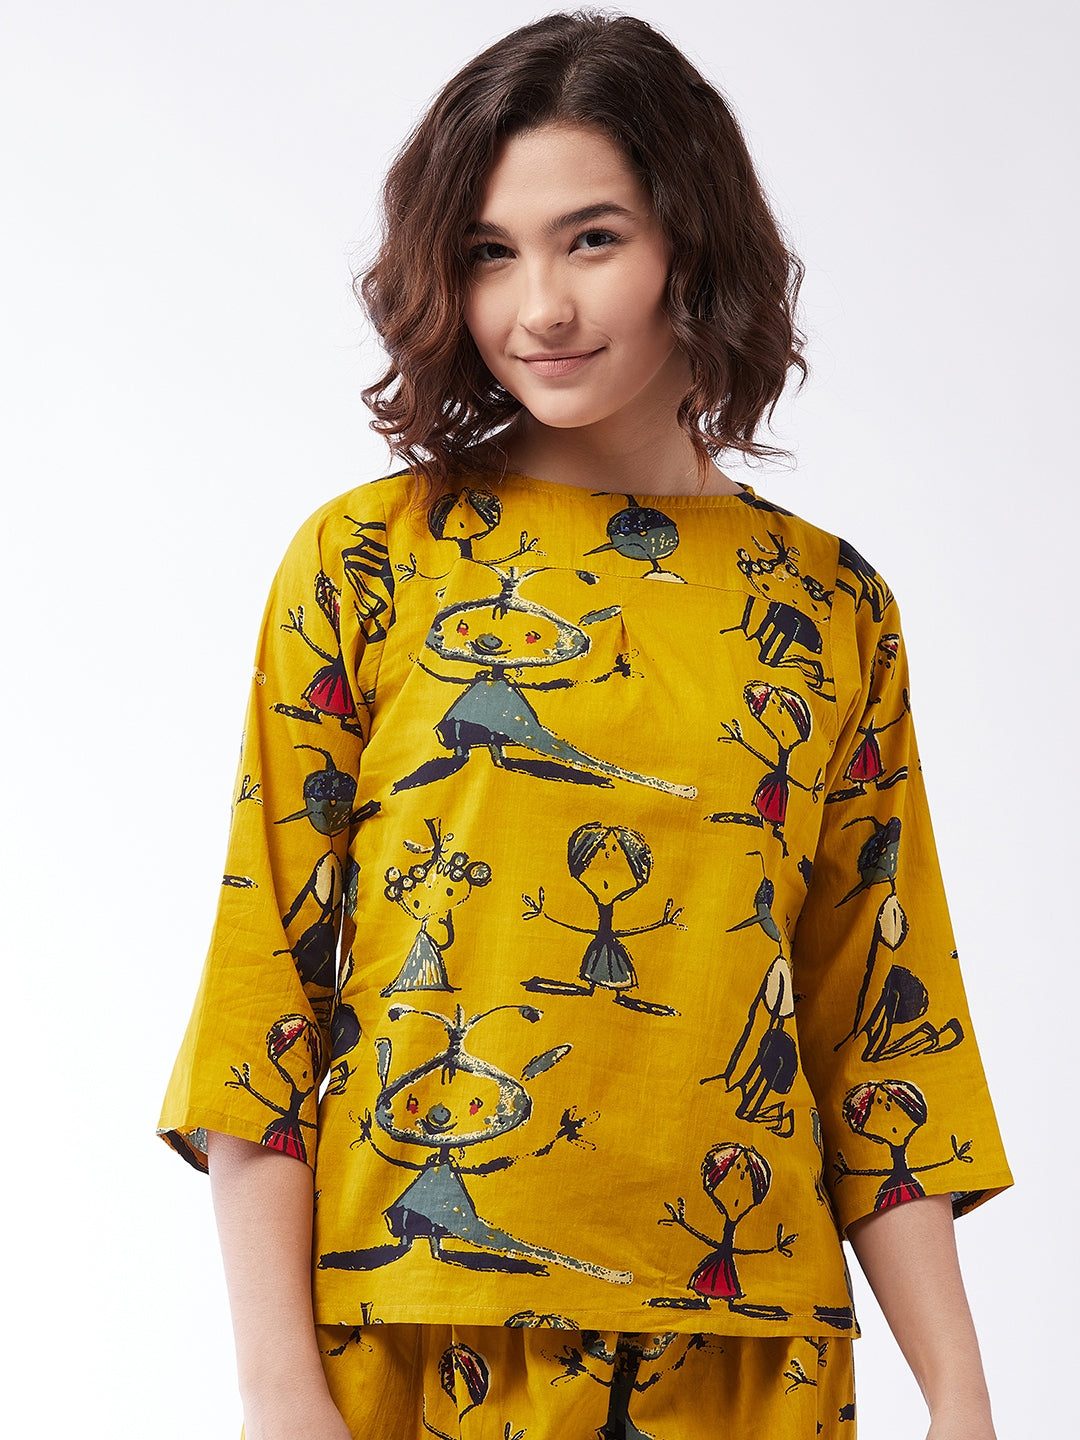 Quirky Top With Sleevs For Teens